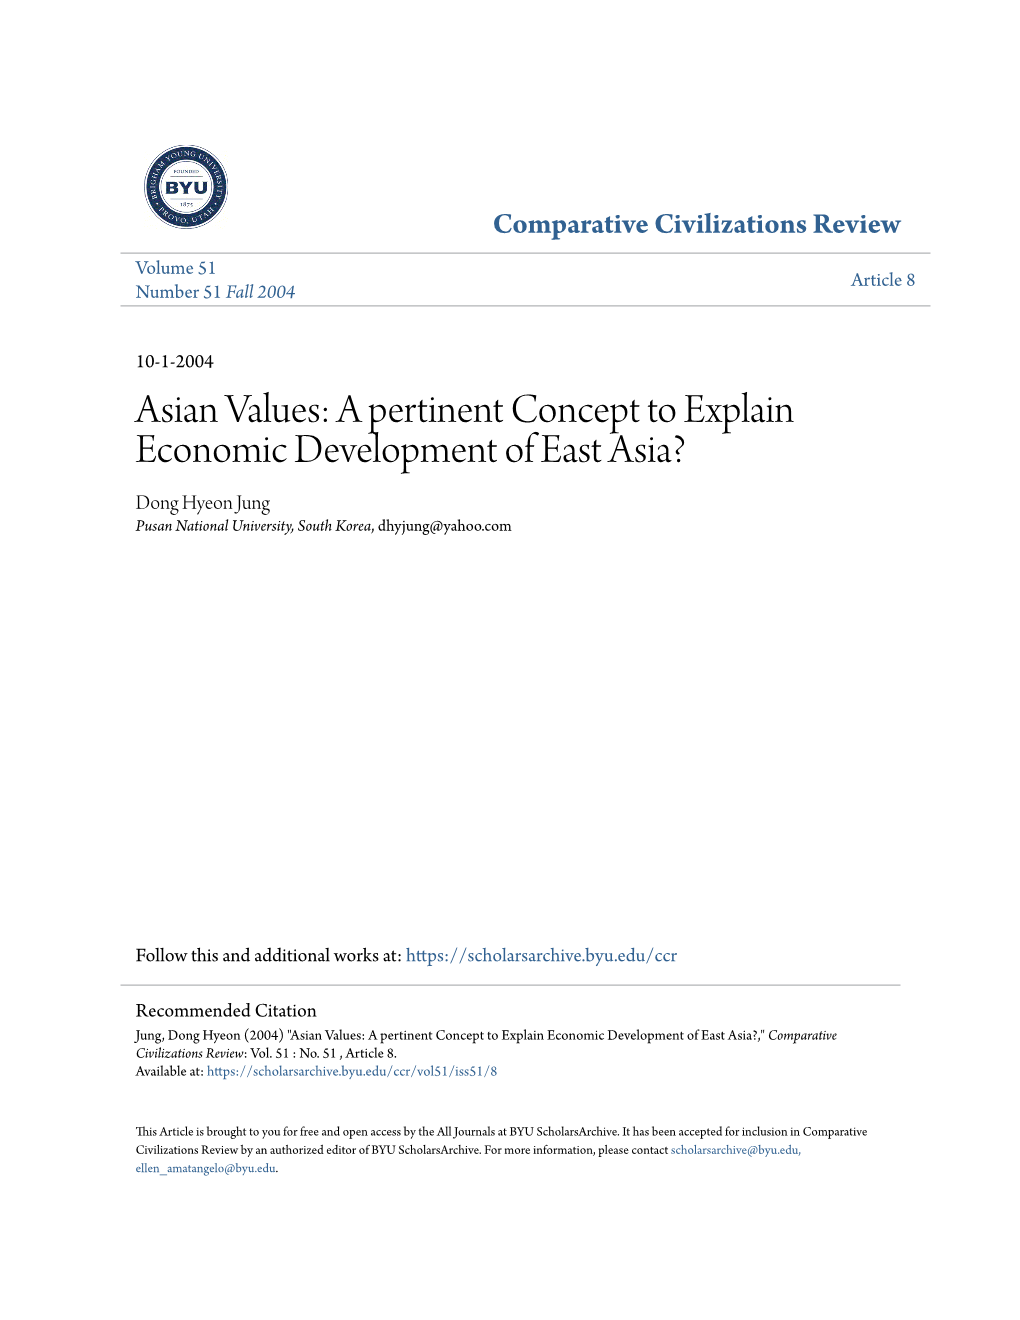 Asian Values: a Pertinent Concept to Explain Economic Development of East Asia? Dong Hyeon Jung Pusan National University, South Korea, Dhyjung@Yahoo.Com